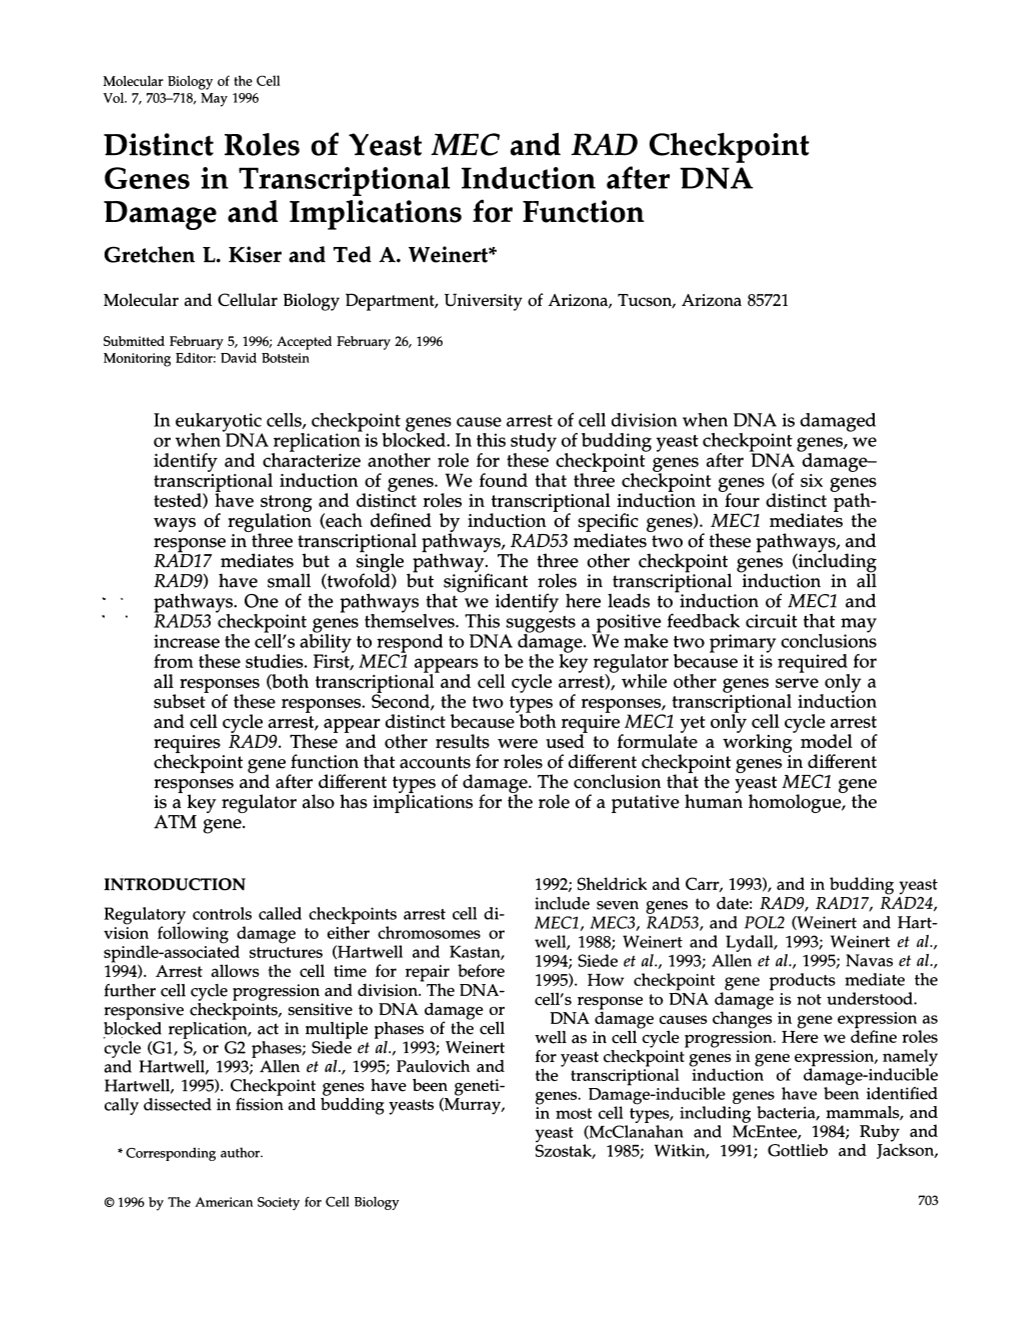 Genes in Transcriptional Induction After DNA Damage and Implications for Function Gretchen L